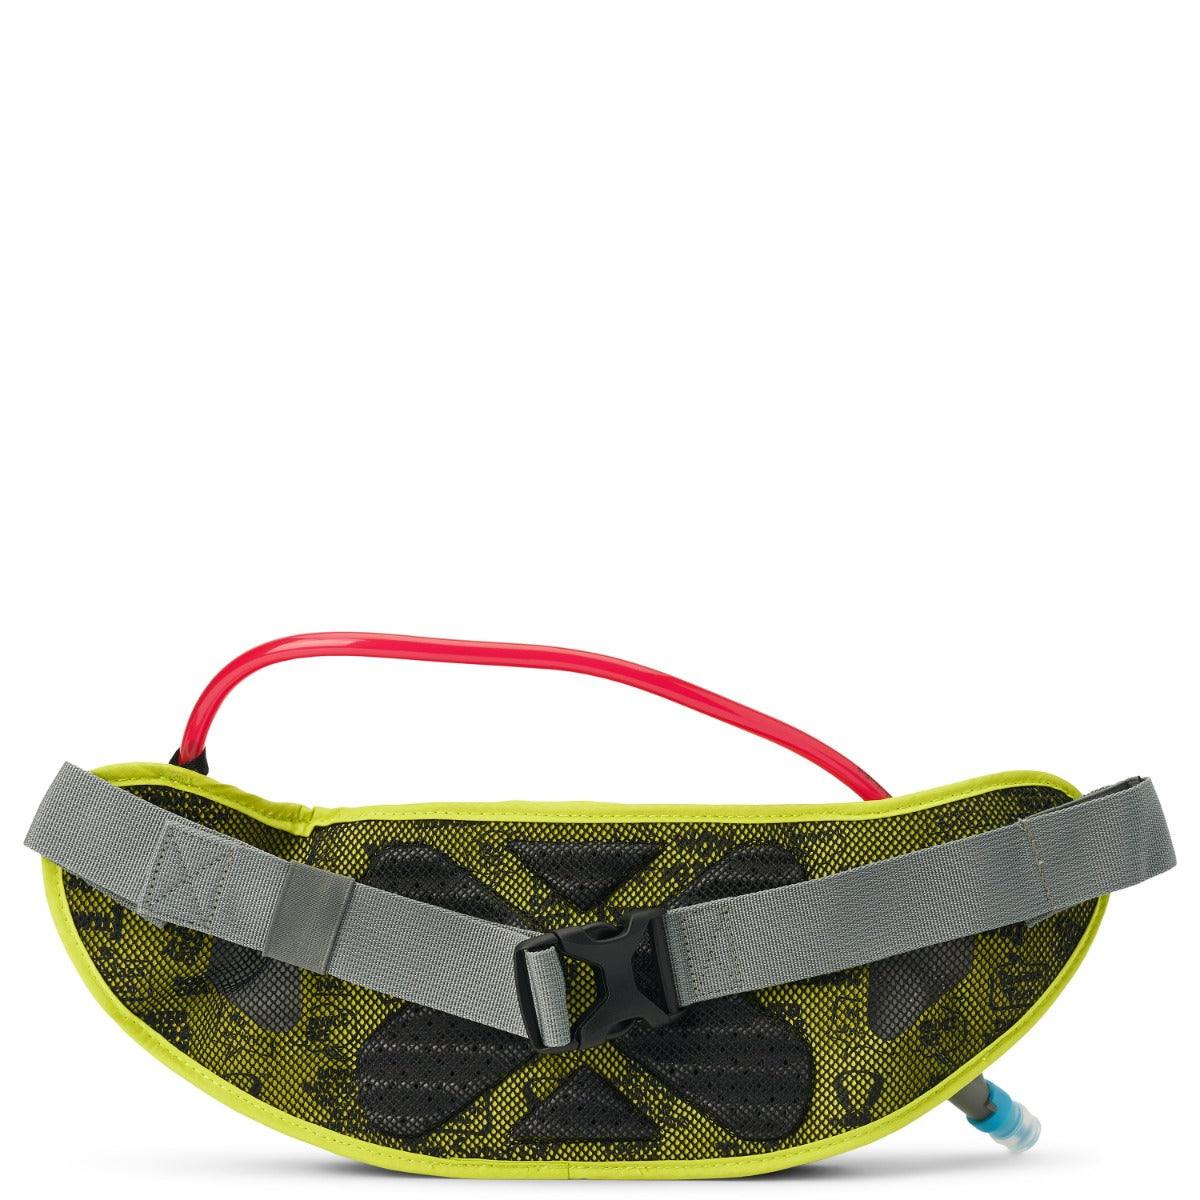 USWE Zulo 2 Hydration Waist Pack Crazy Yellow – With 1 Litre Bladder